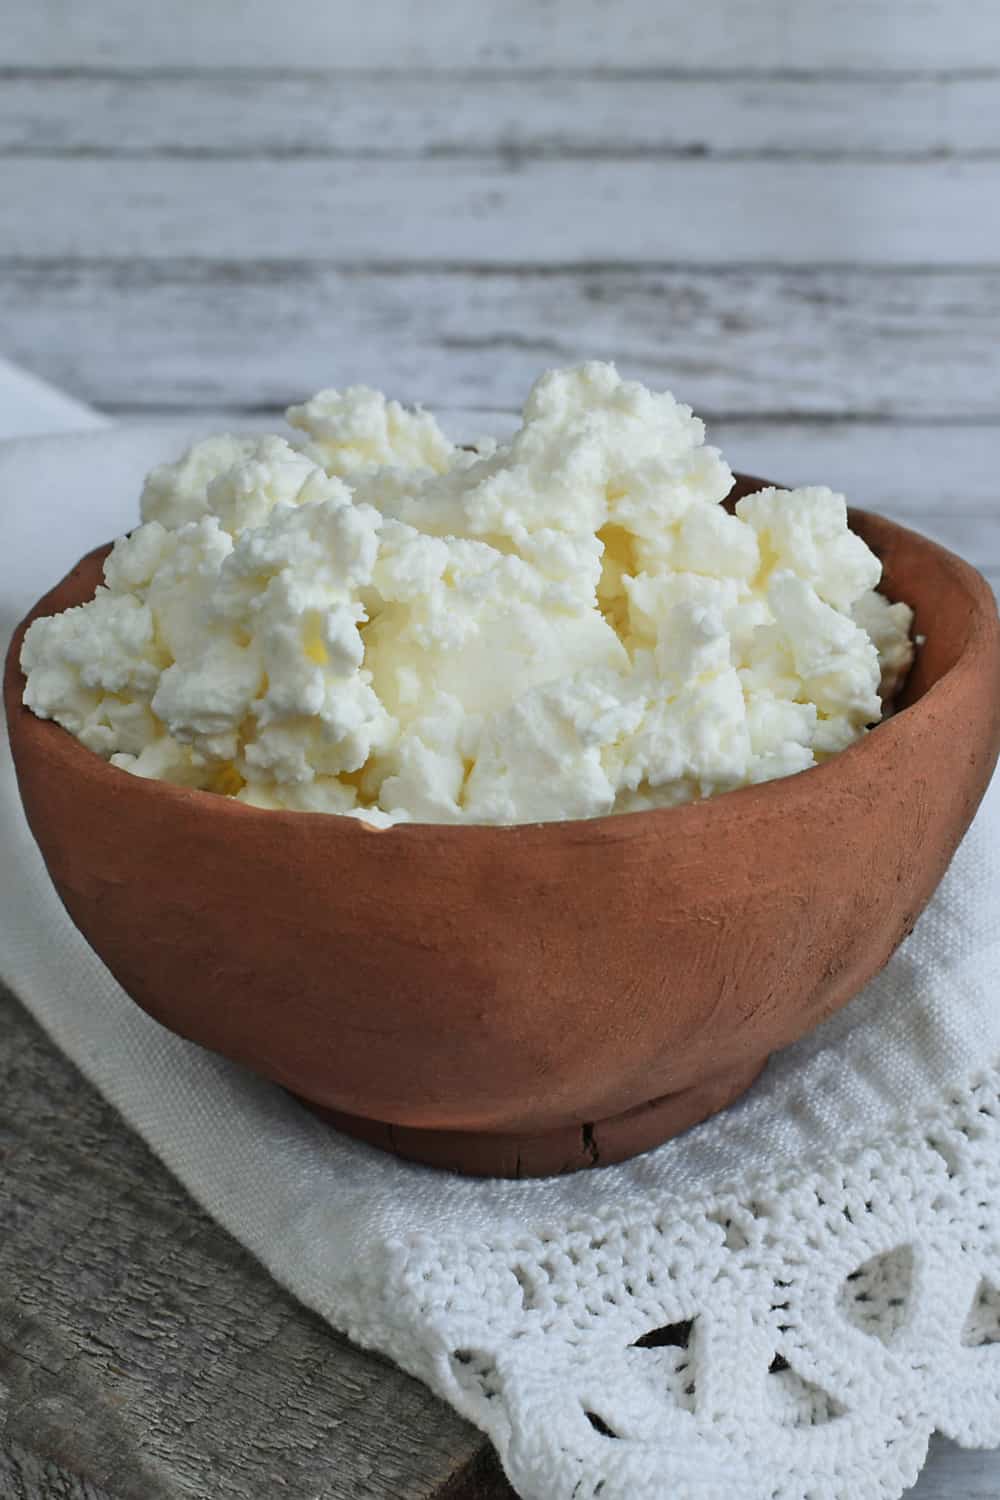 can i get sick from eating old cottage cheese?